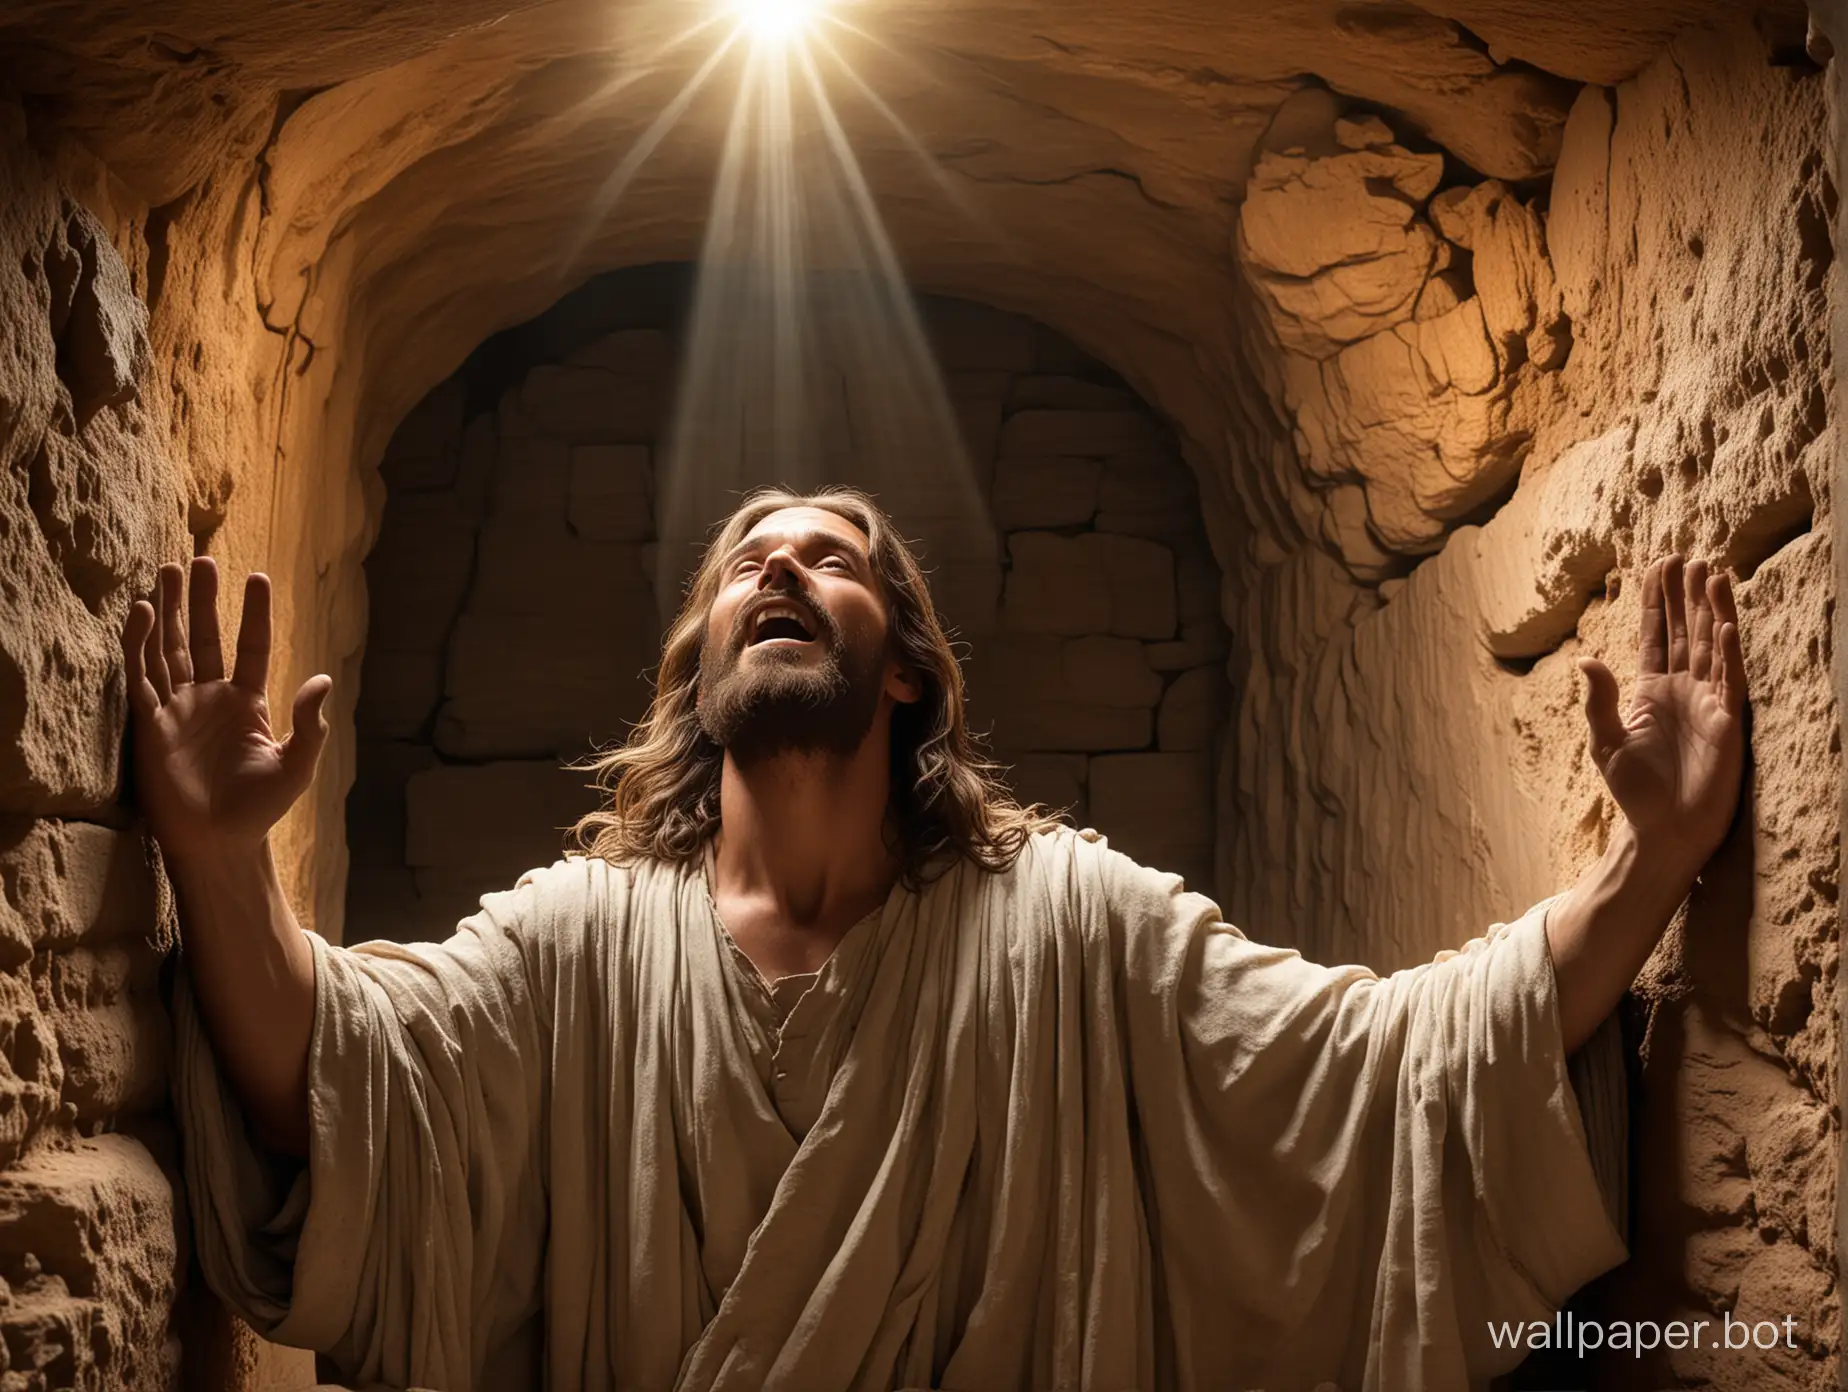 A striking and detailed photograph of Jesus Christ emerging from an open tomb during his resurrection. The circular stone that sealed the tomb is rolled aside, revealing the empty burial chamber. Jesus, with his long hair and beard, stands confidently with his hands raised, symbolizing his victory over death. The lighting in the image is soft yet dramatic, casting a warm glow on his face, highlighting every sharp feature. The background reveals an ancient, dusty tomb, evoking a sense of awe and reverence., photo